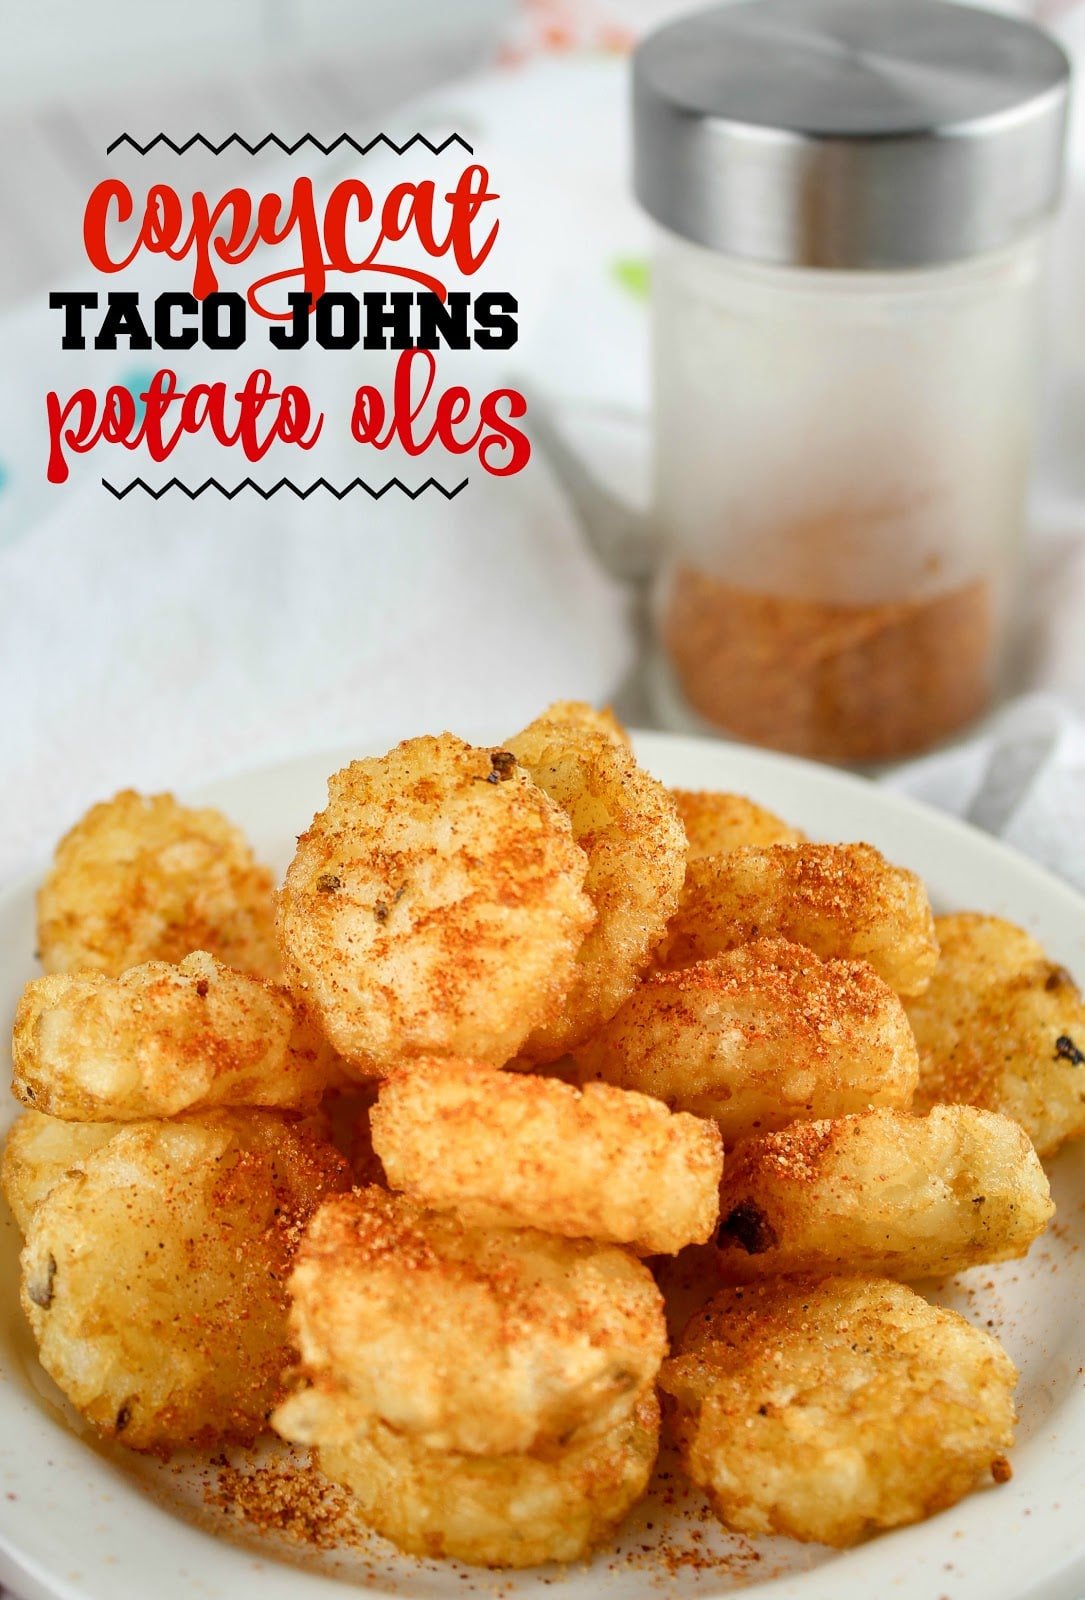 Taco Johns Potato Oles are one of my favorite college memories! The seasoning is a little spicy, a little salty and so delicious! This copycat recipe for the potato oles brought all the good times back!  via @foodhussy